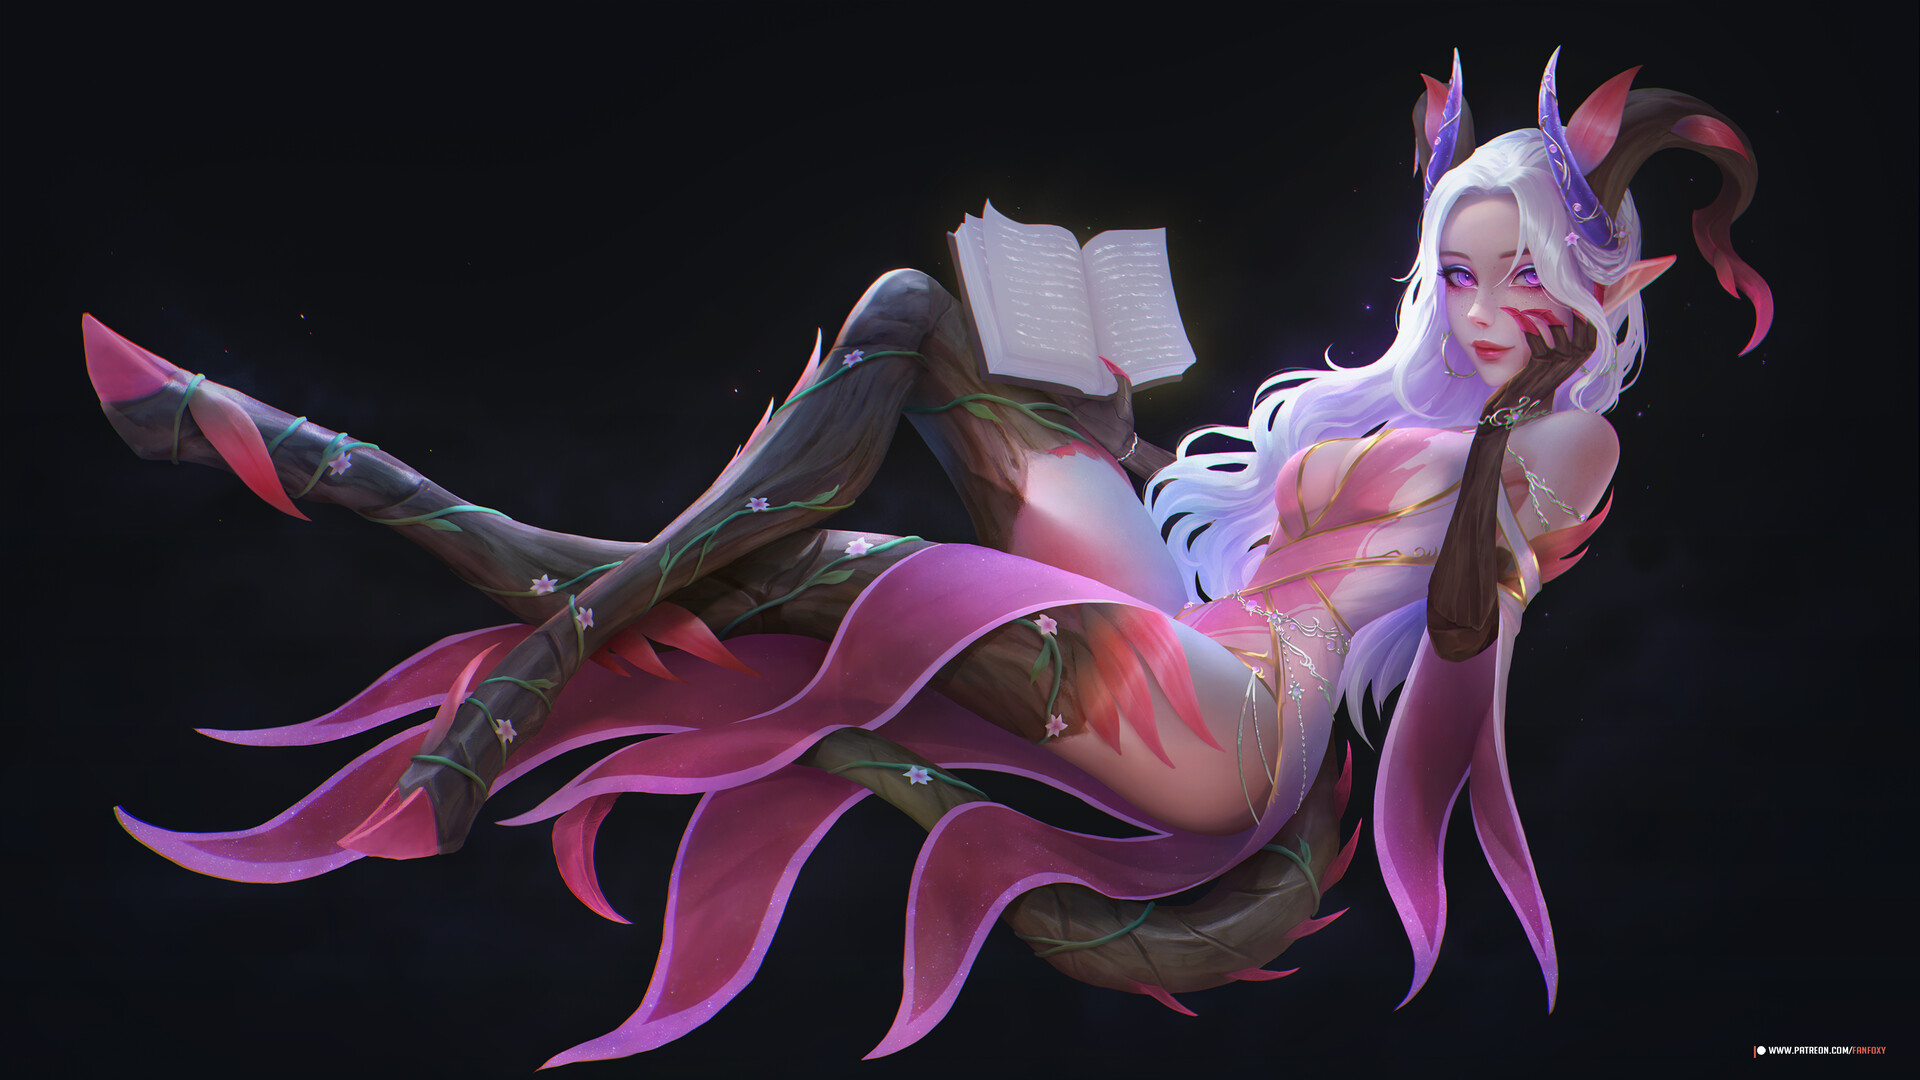 Fanfoxy Drawing Women Horns Pink Fantasy Art Legs Crossed Looking At Viewer Books Smiling Pointy Ear 1920x1080